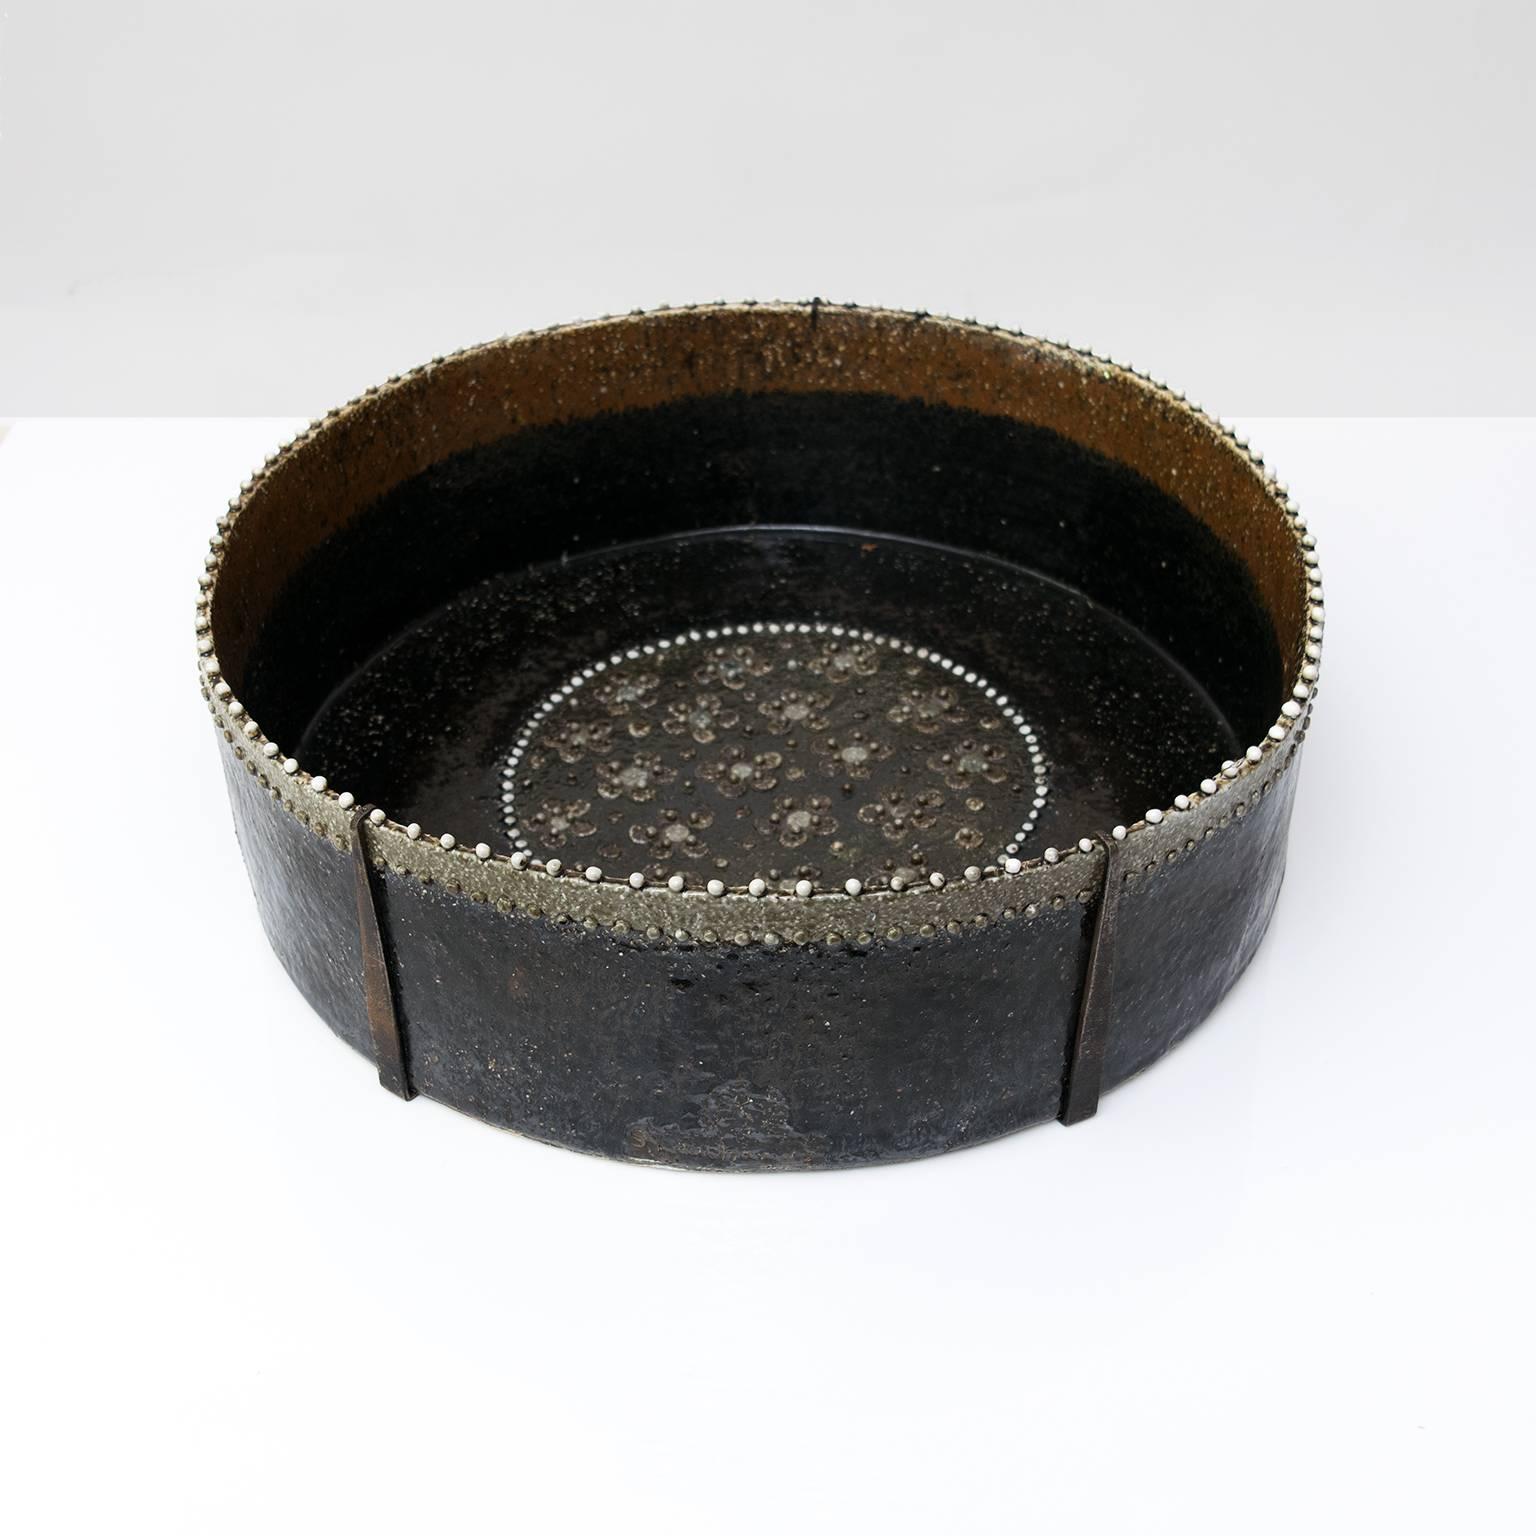 Very large scale Scandinavian Modern ceramic studio bow by Sylvia Leuchovius. The bowl is decorated with small dots and ball contrasted against neutral brown and gray glazes. This piece retains it custom removable wall mount mechanism. 
Measures:-